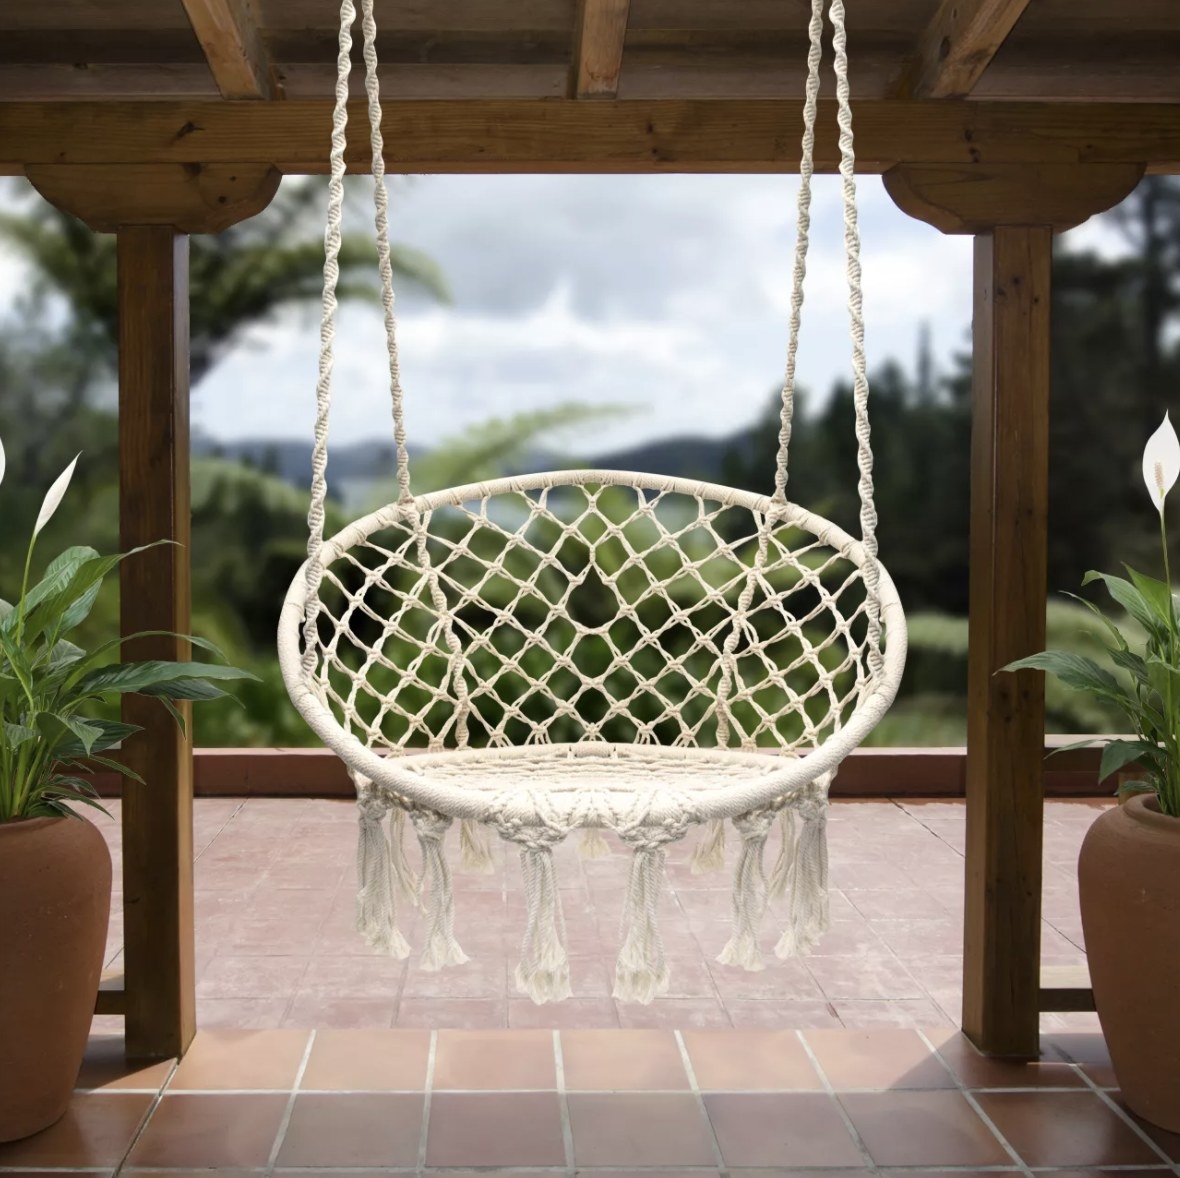 A white, braided chair with tassels hanging from four ropes attached to the ceiling of a patio